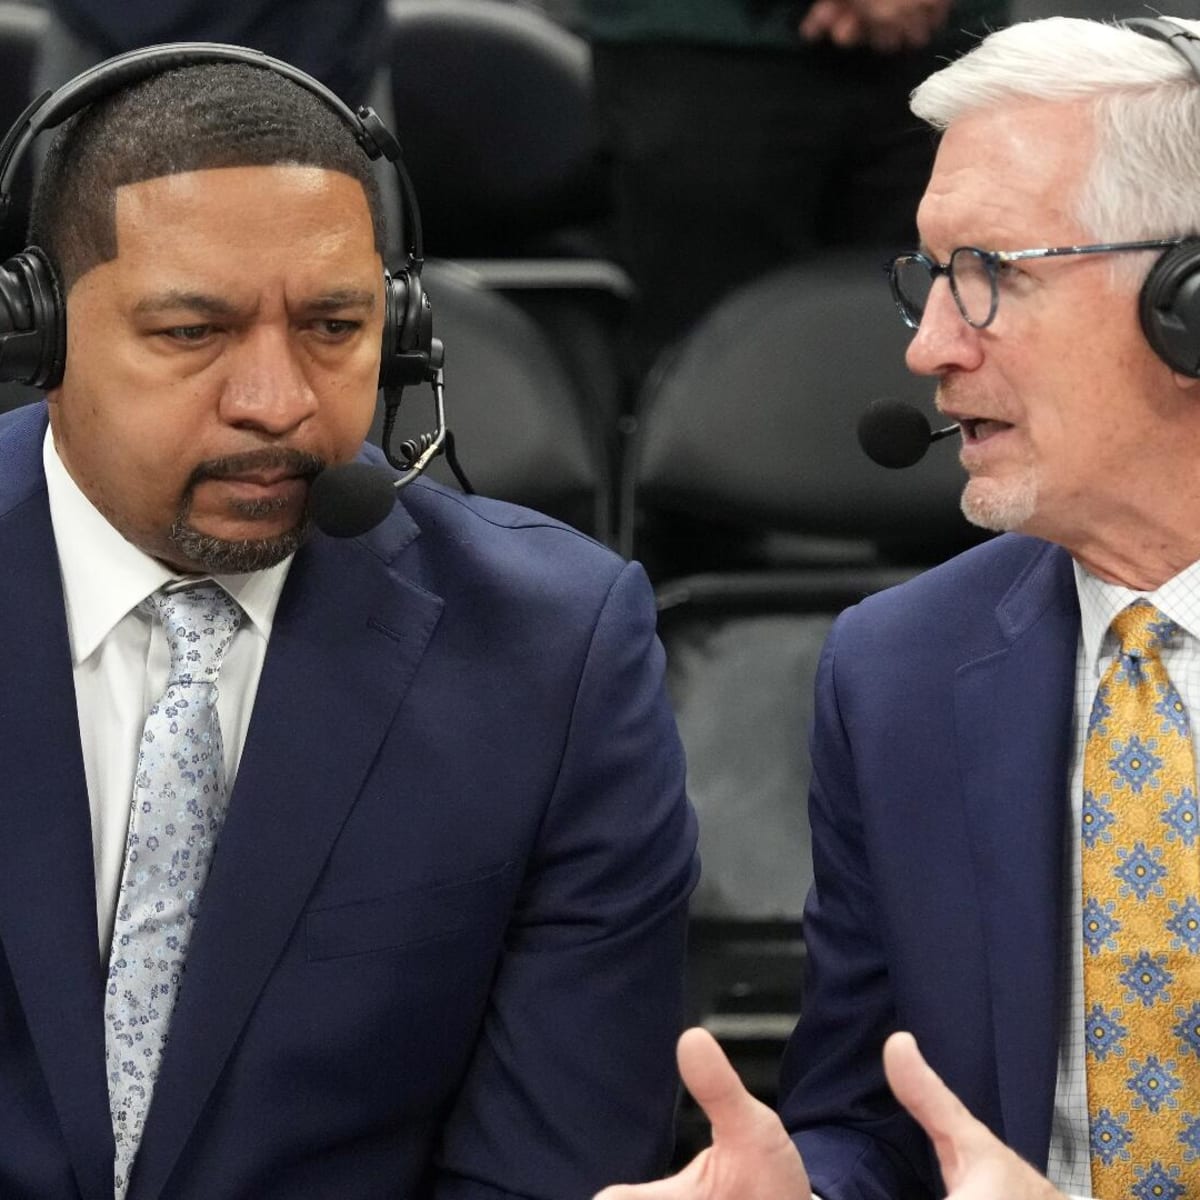 NBA Announcer Mark Jackson Confirms He Was Fired From ESPN